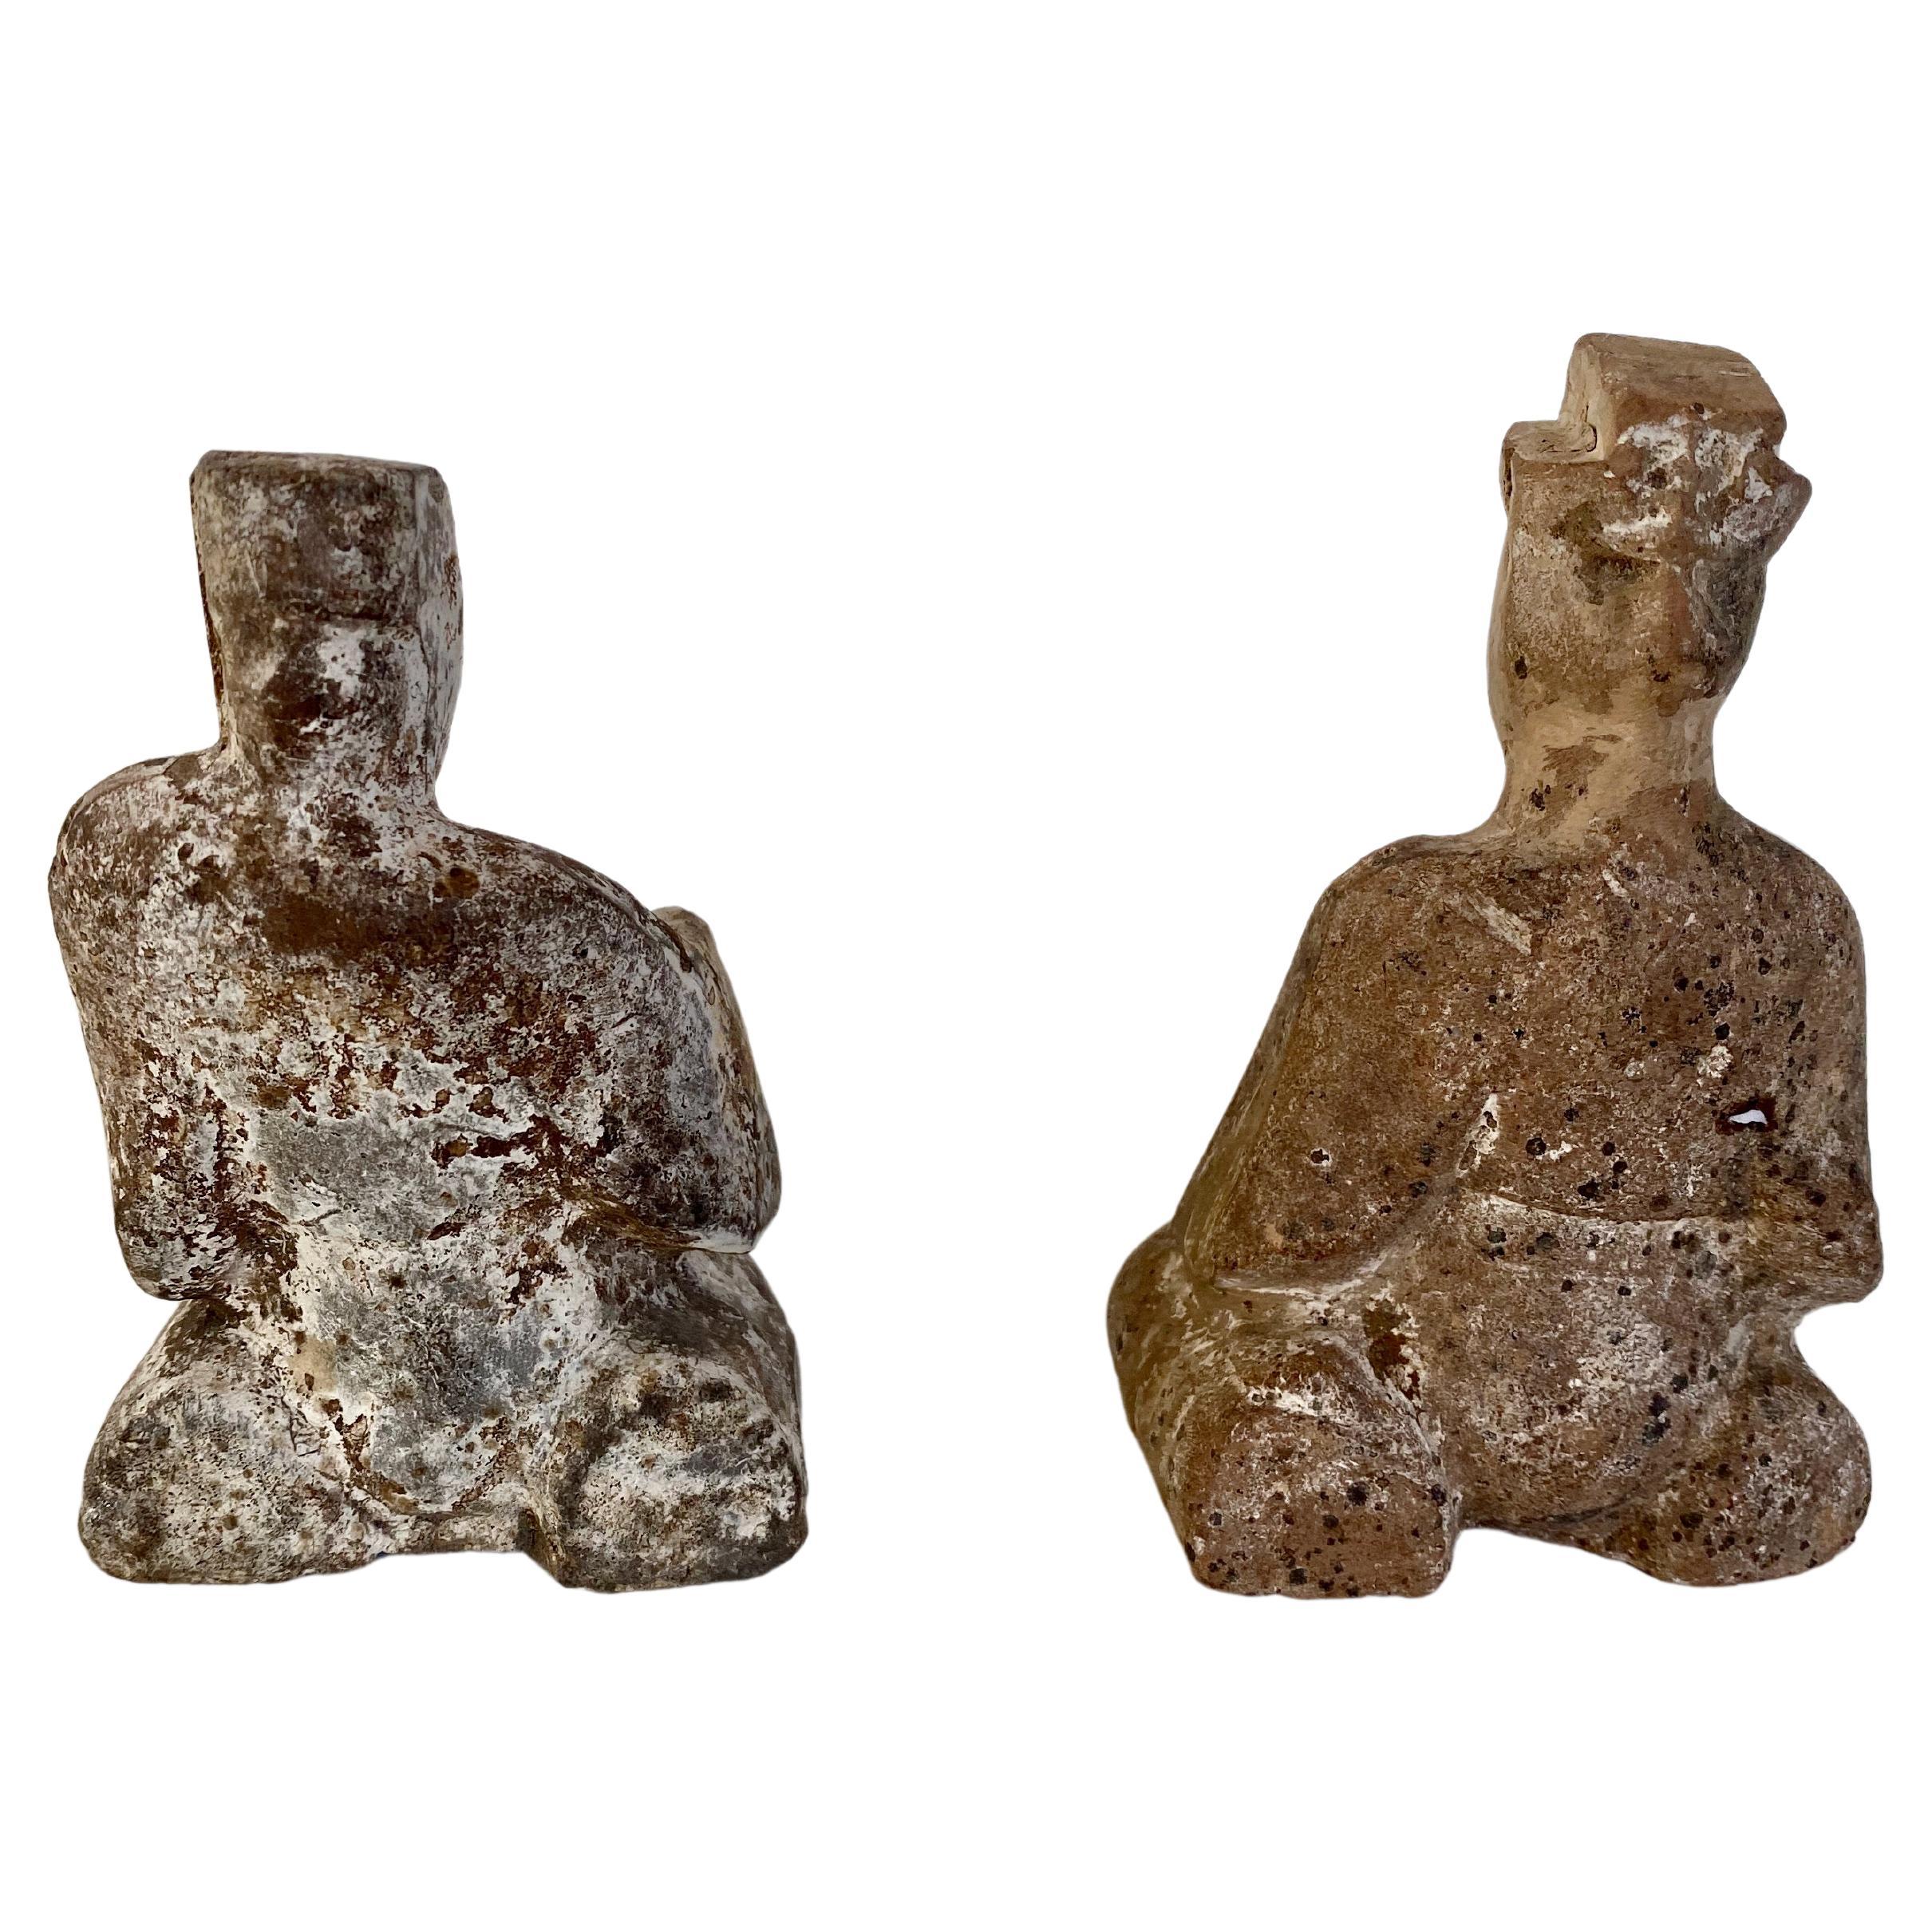 Pair of seated pottery figures, Han dynasty (2nd century BC to 2nd century AD). The taller of the two sits very still and upright, his hands folded into his sleeves, gazing straight ahead. His companion is slouched to the side, with one shoulder